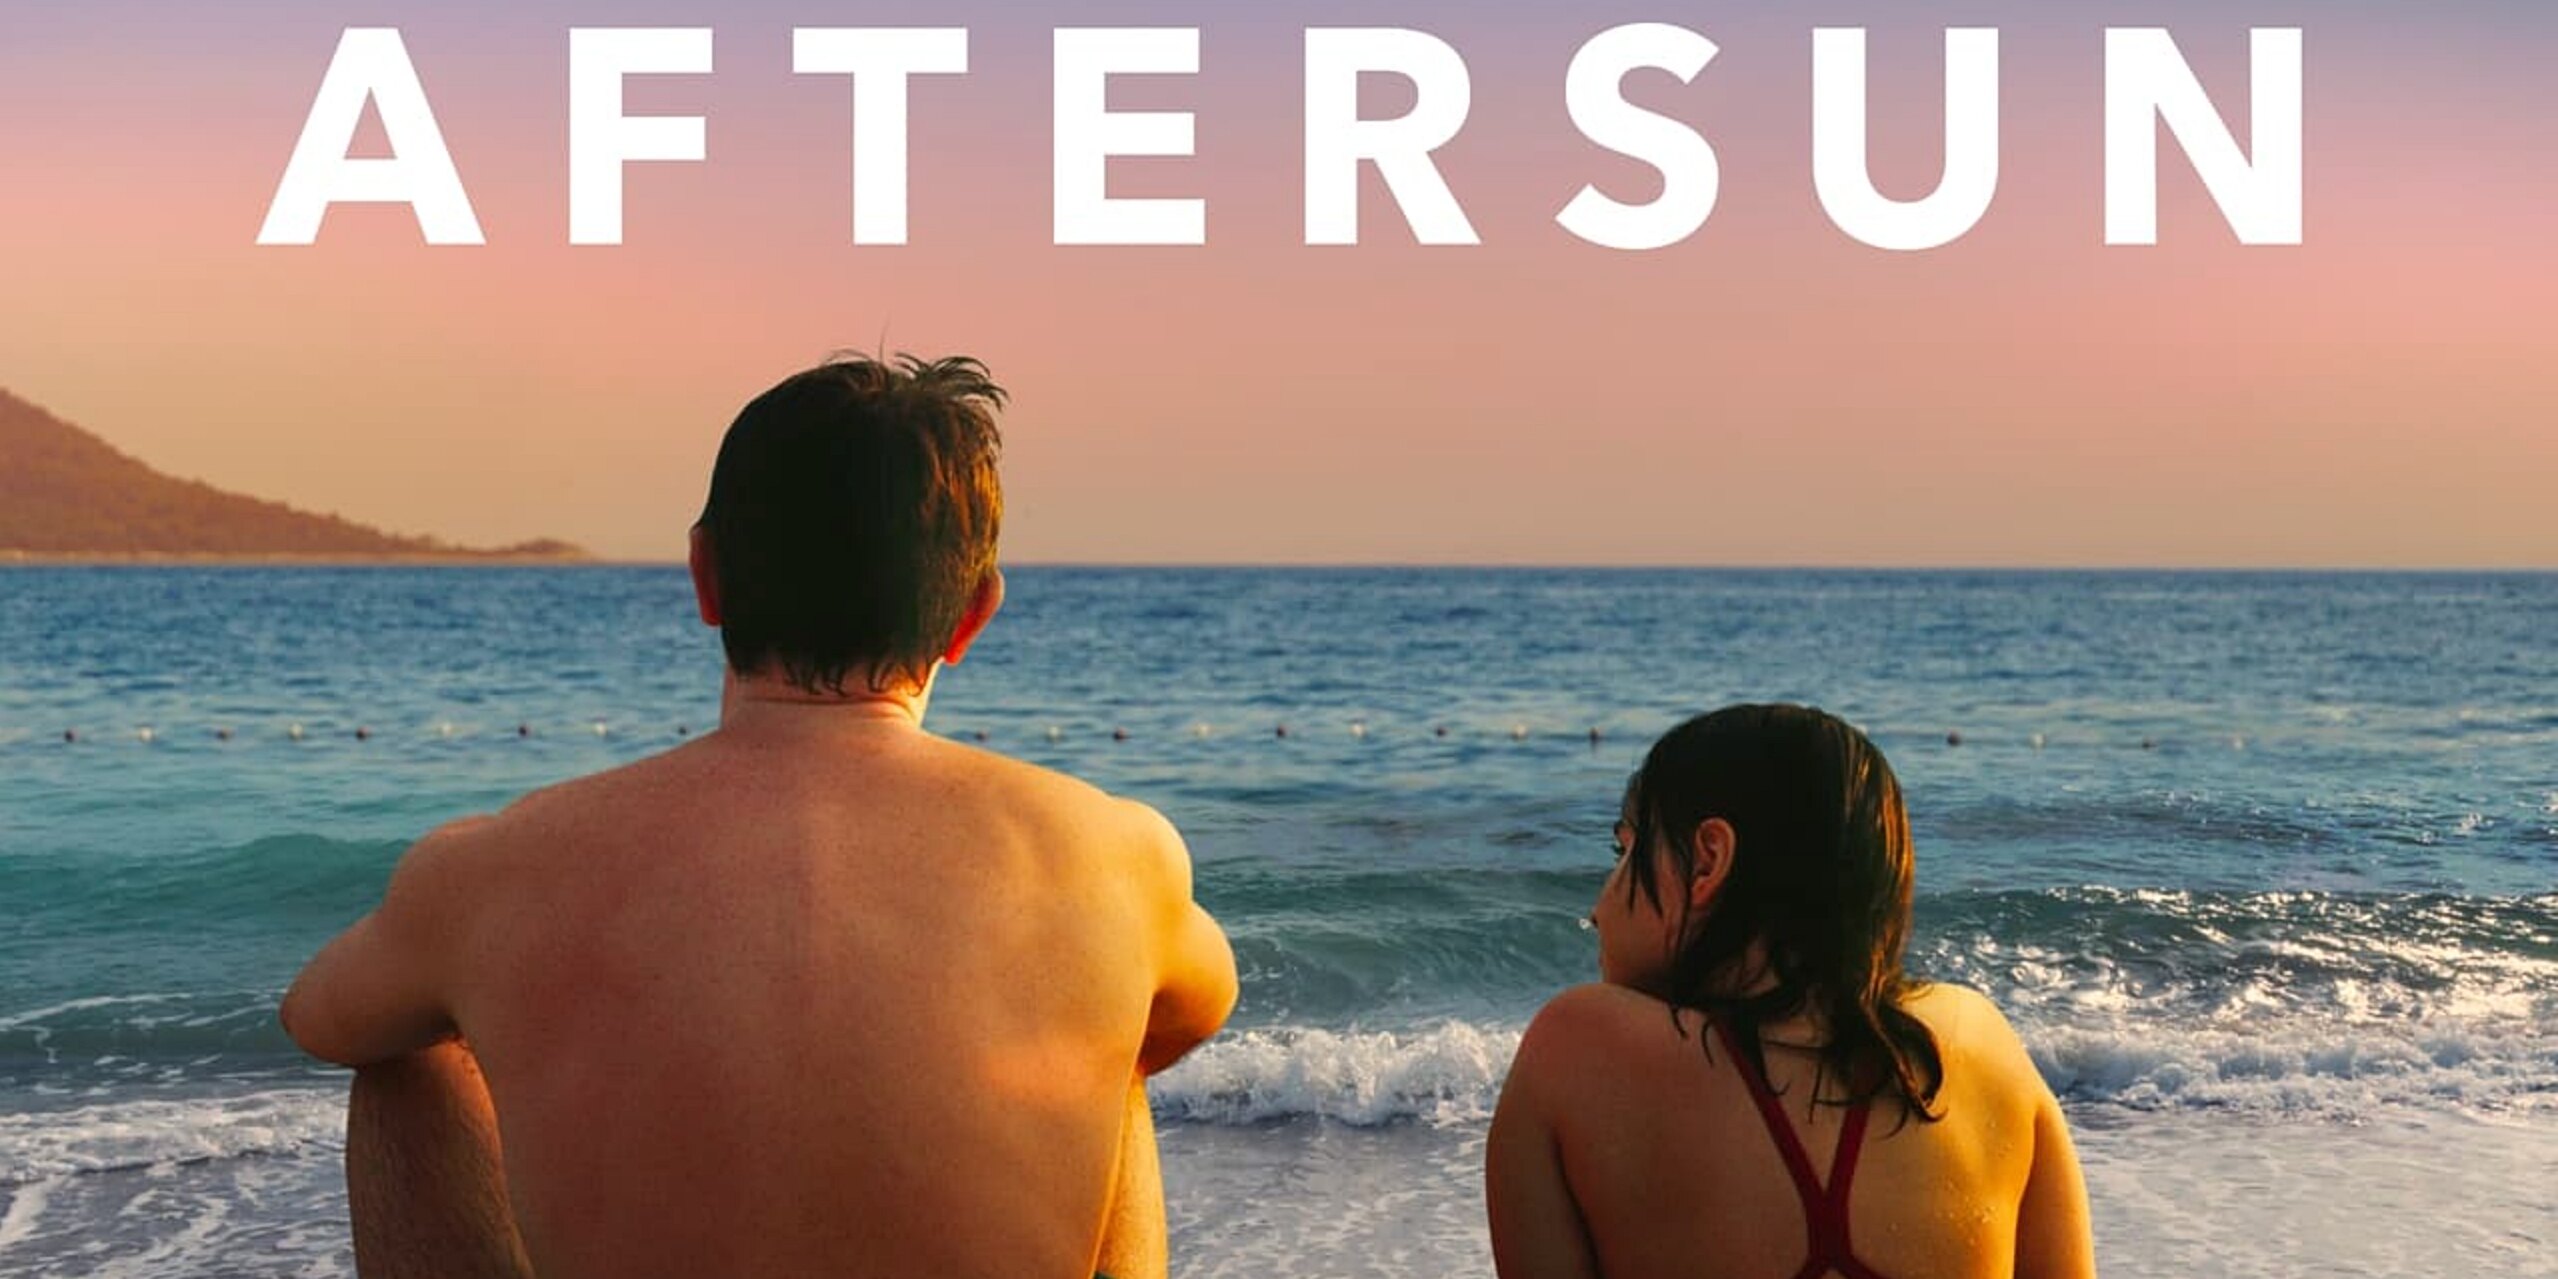 33-facts-about-the-movie-aftersun